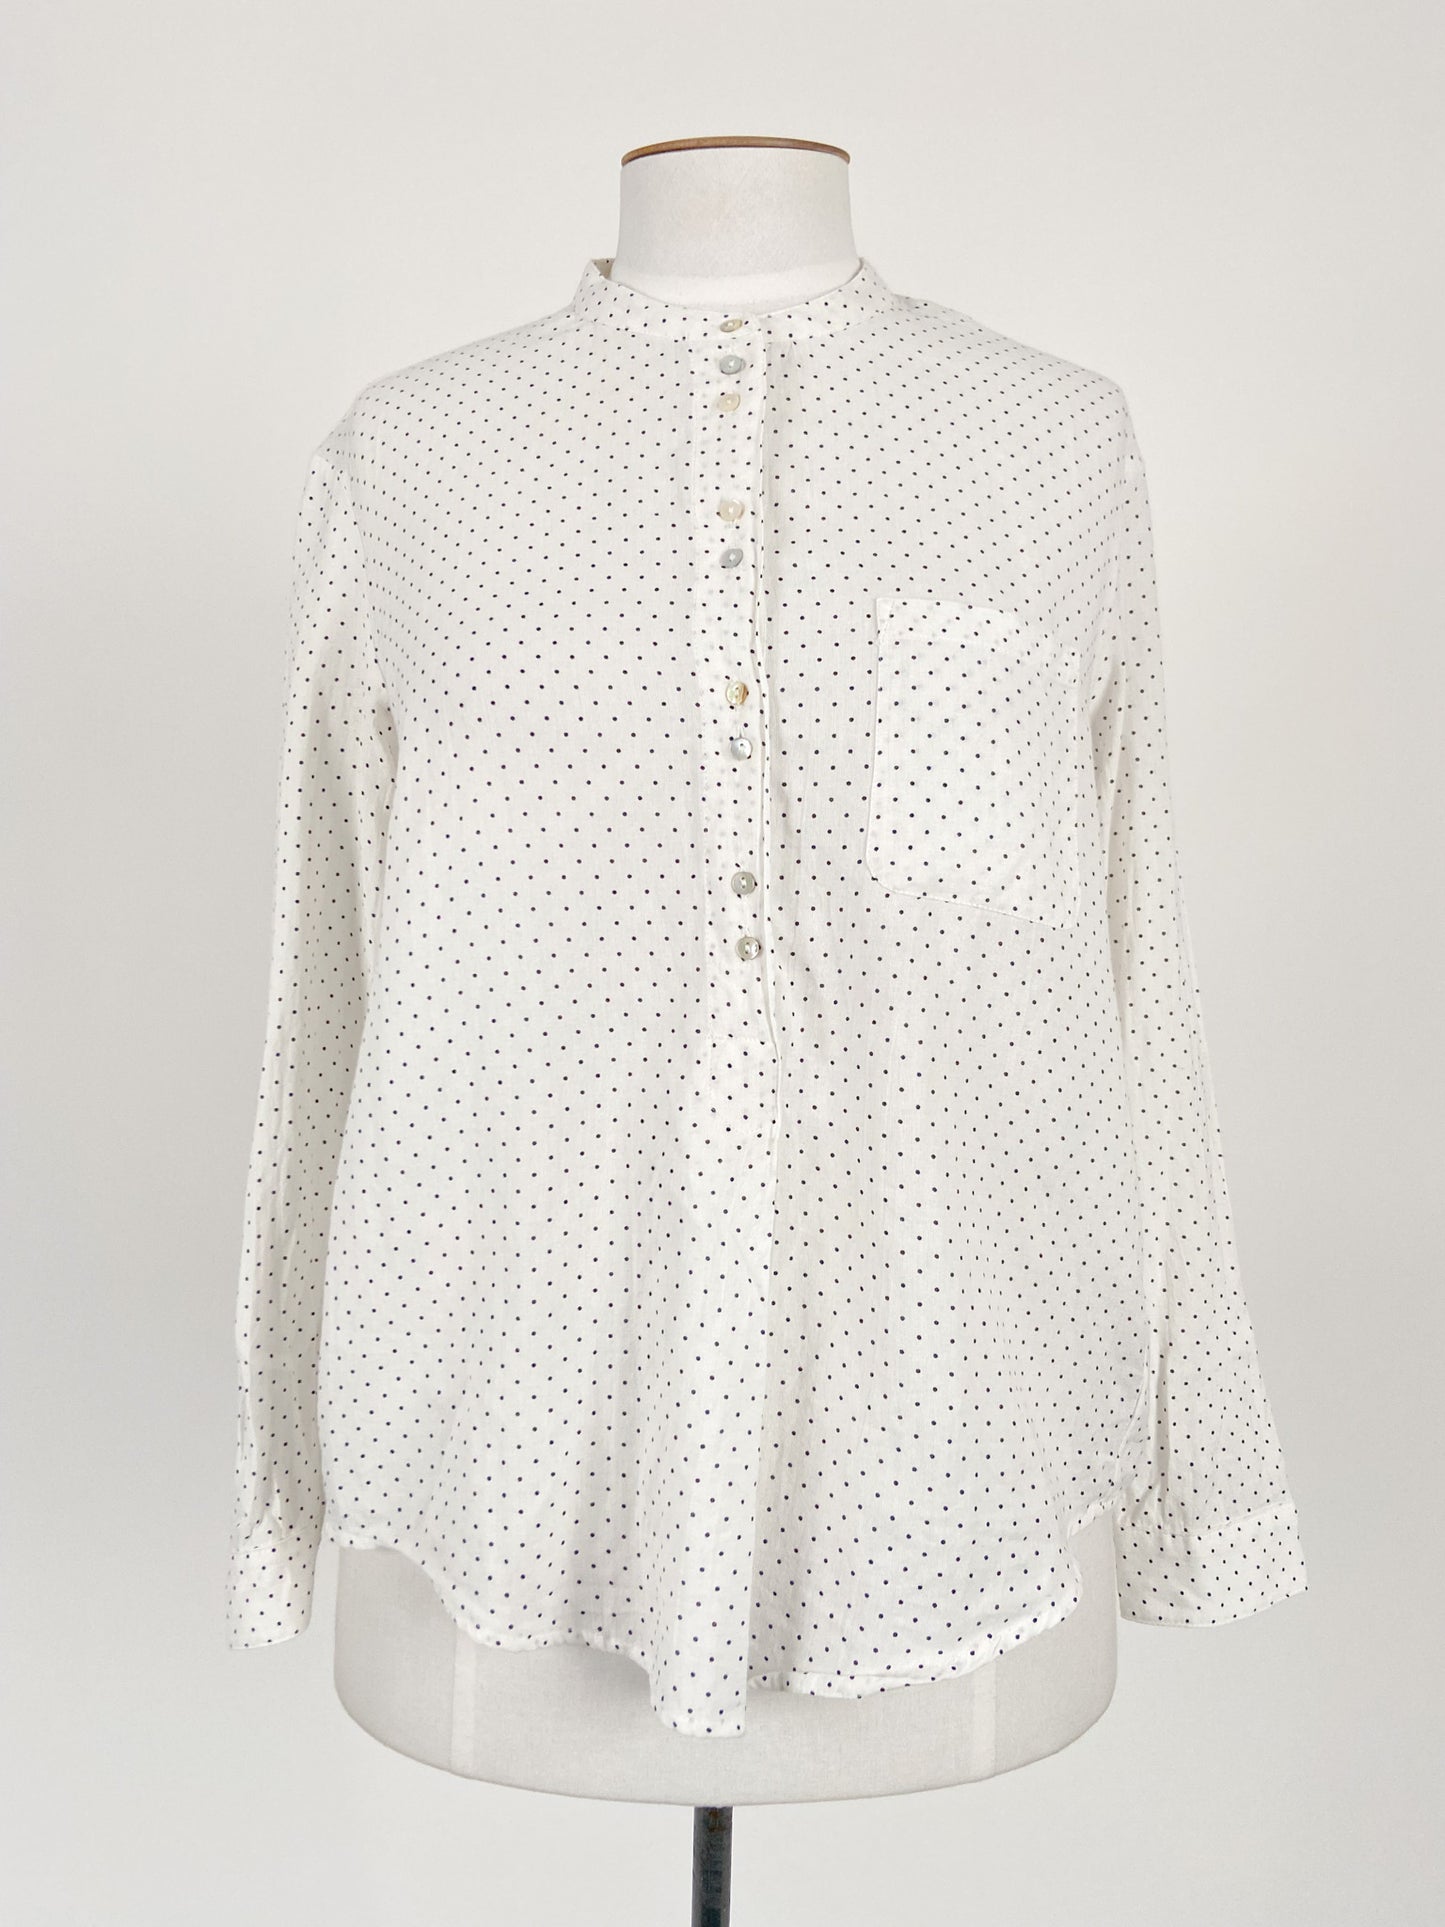 E Sprit | White Casual/Workwear Top | Size 16